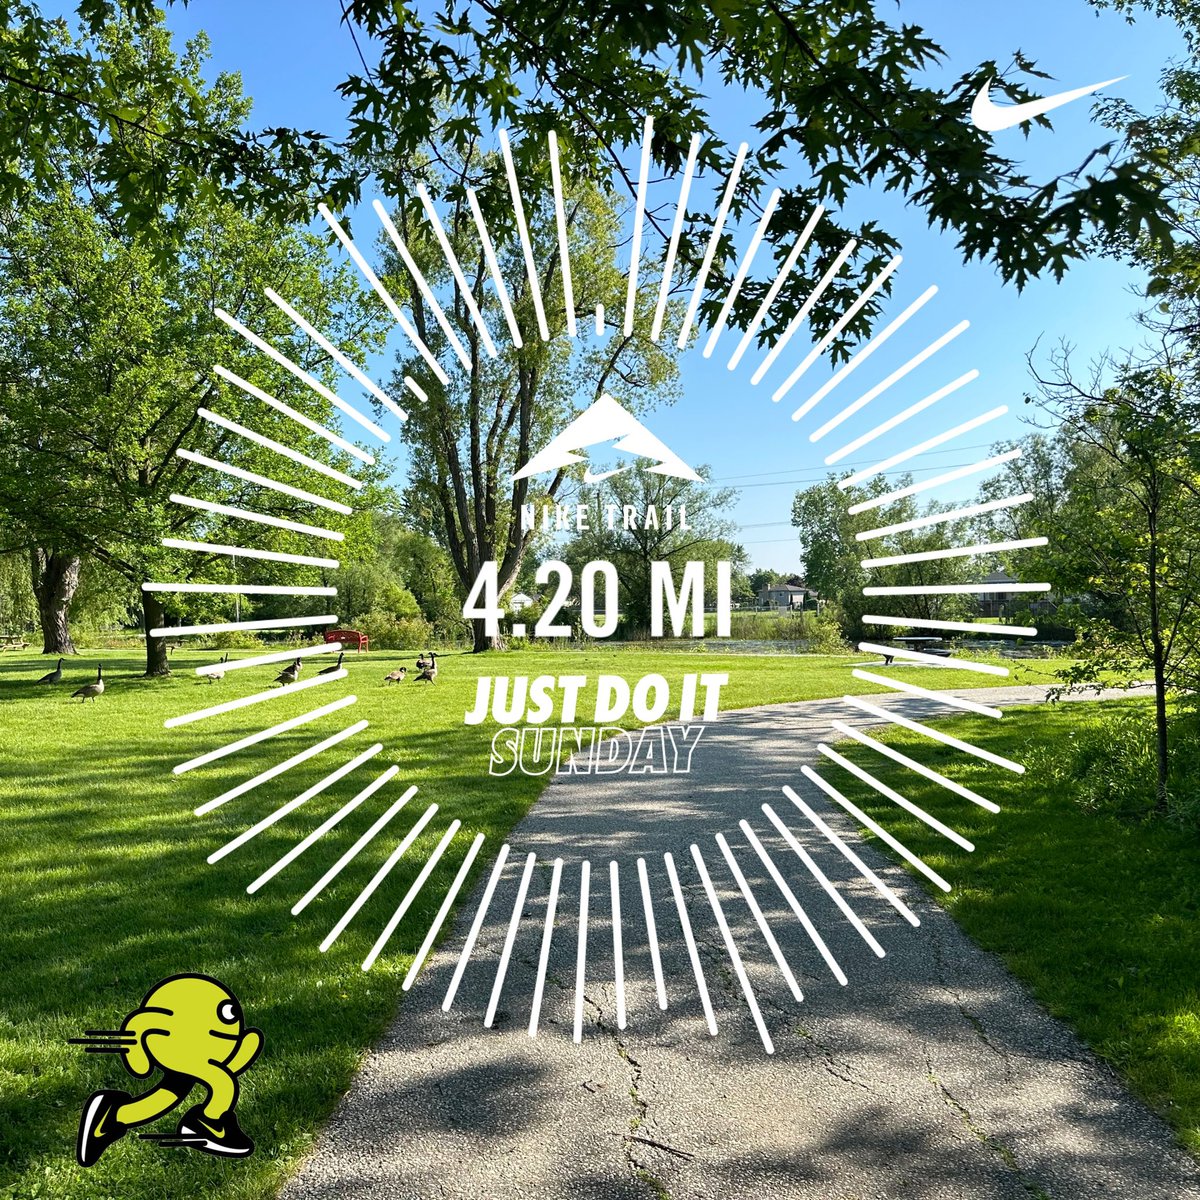 Temps & humidity are climbing. Stay hydrated out there folks! And Happy Victoria Day weekend my fellow Canadians! 🇨🇦👟😀☀️🇨🇦

#MorningRun #Running #Runner #Run #HealthyHabits #HealthyLifestyle #HOKA #Mach6 #Nike #JustDoIt #ComeRunWithUs #NRC #FlyHumanFly